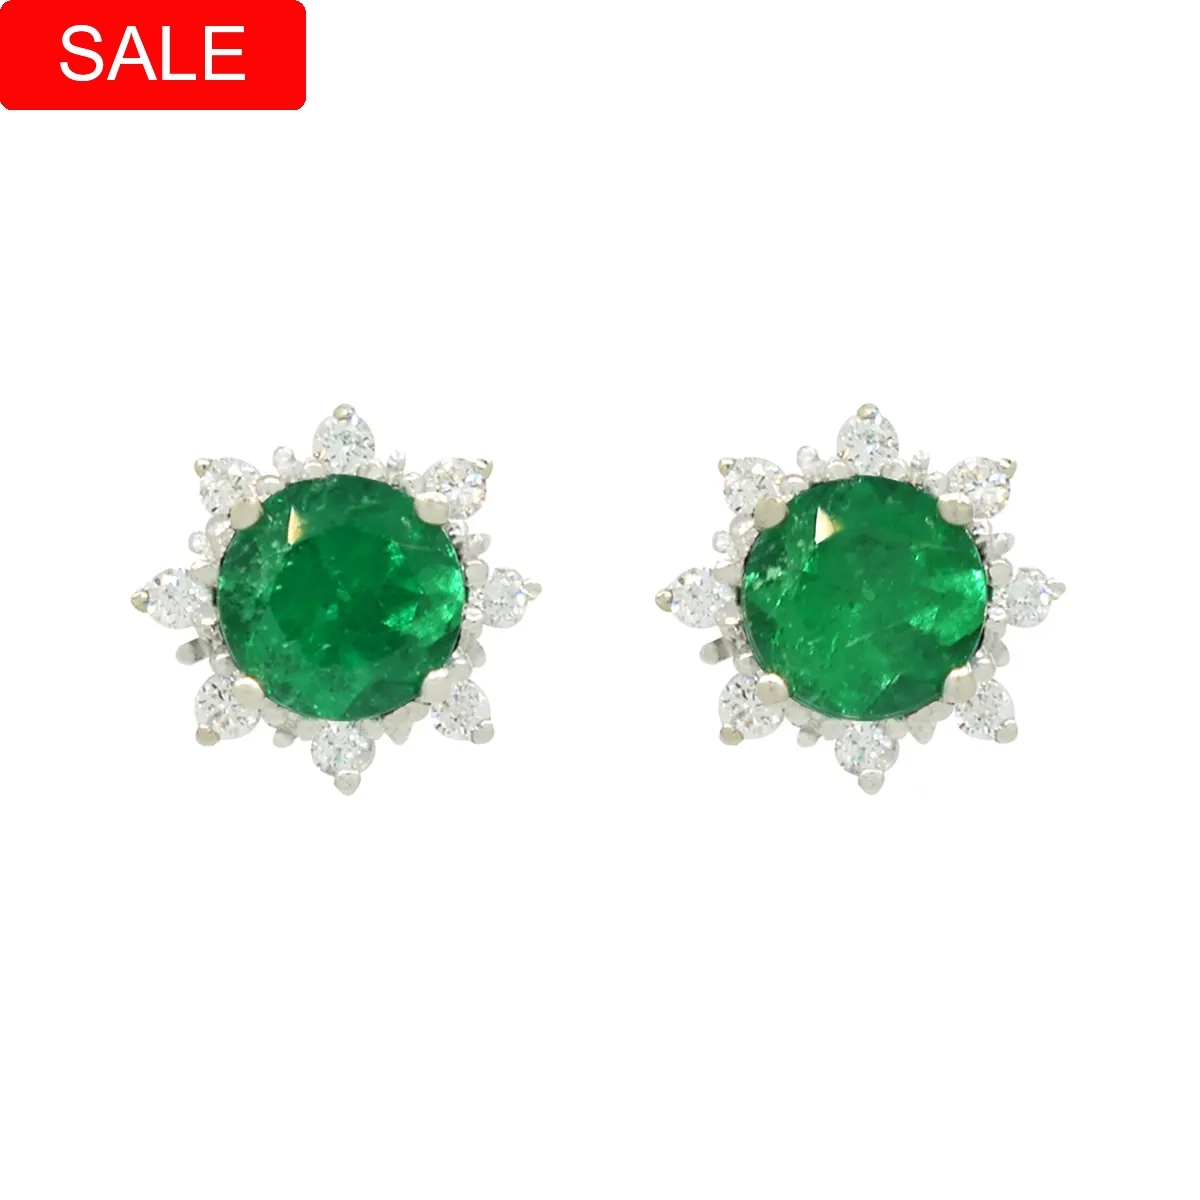 Emerald and diamond stud earrings custom made in 18K white gold with 0.73 Ct. t.w. in 2 round cut natural Colombian emeralds and 0.16 Ct. t.w. in 16 genuine diamonds